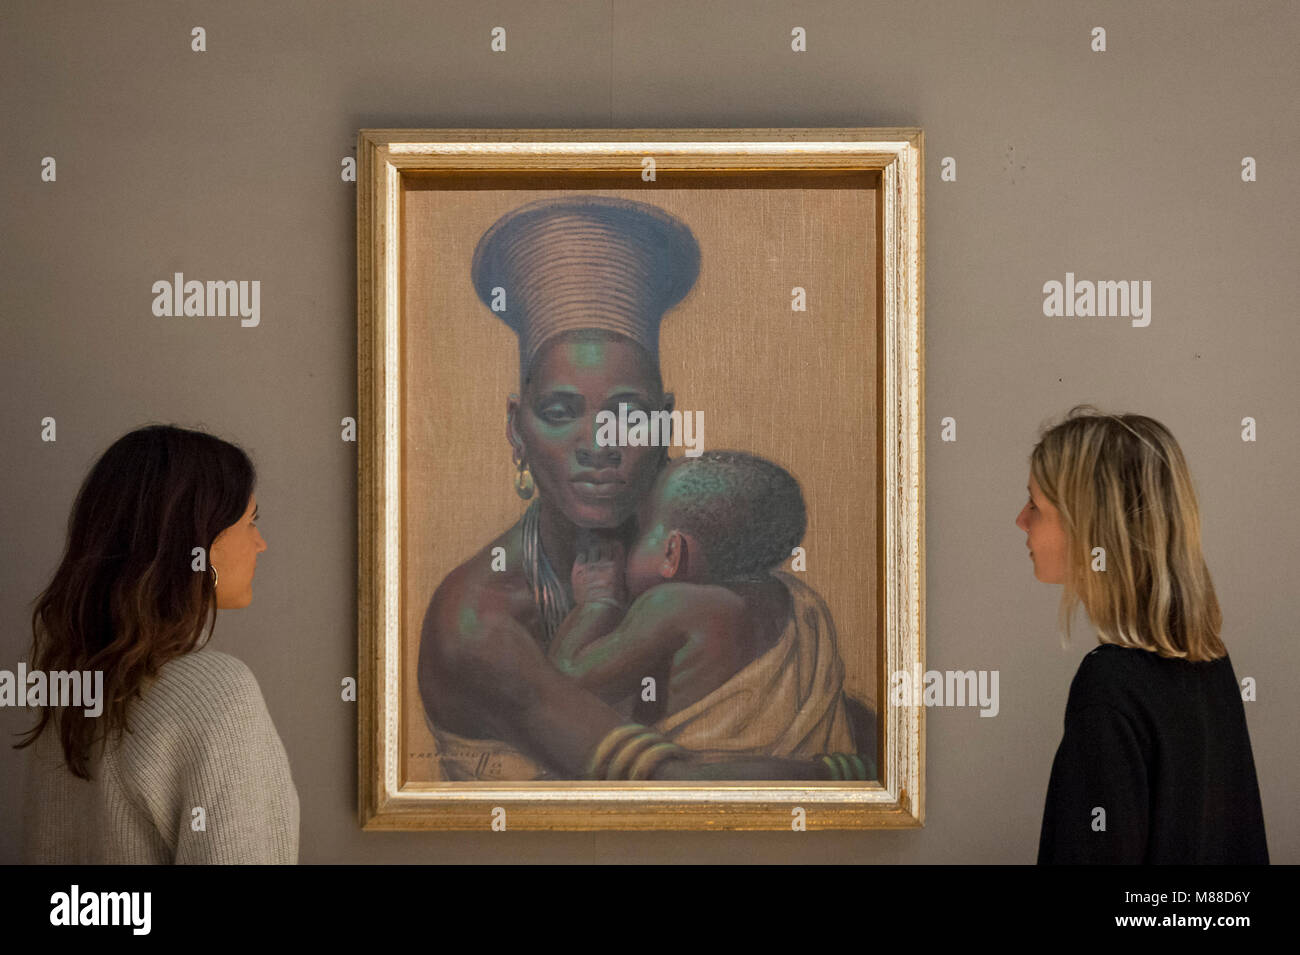 London, UK.  16 March 2018.  Staff members view 'African Madonna', 1952, by Vladimir Griegorovich Tretchikoff (Est. £30,000 - 50,000).  Preview of South African art at Bonhams, New Bond Street which will be sold at auction on 21 March 2018.  The sale features works by renowned South African artists including Irma Stern, Gerard Sekoto and Alexis Preller. Credit: Stephen Chung / Alamy Live News Stock Photo